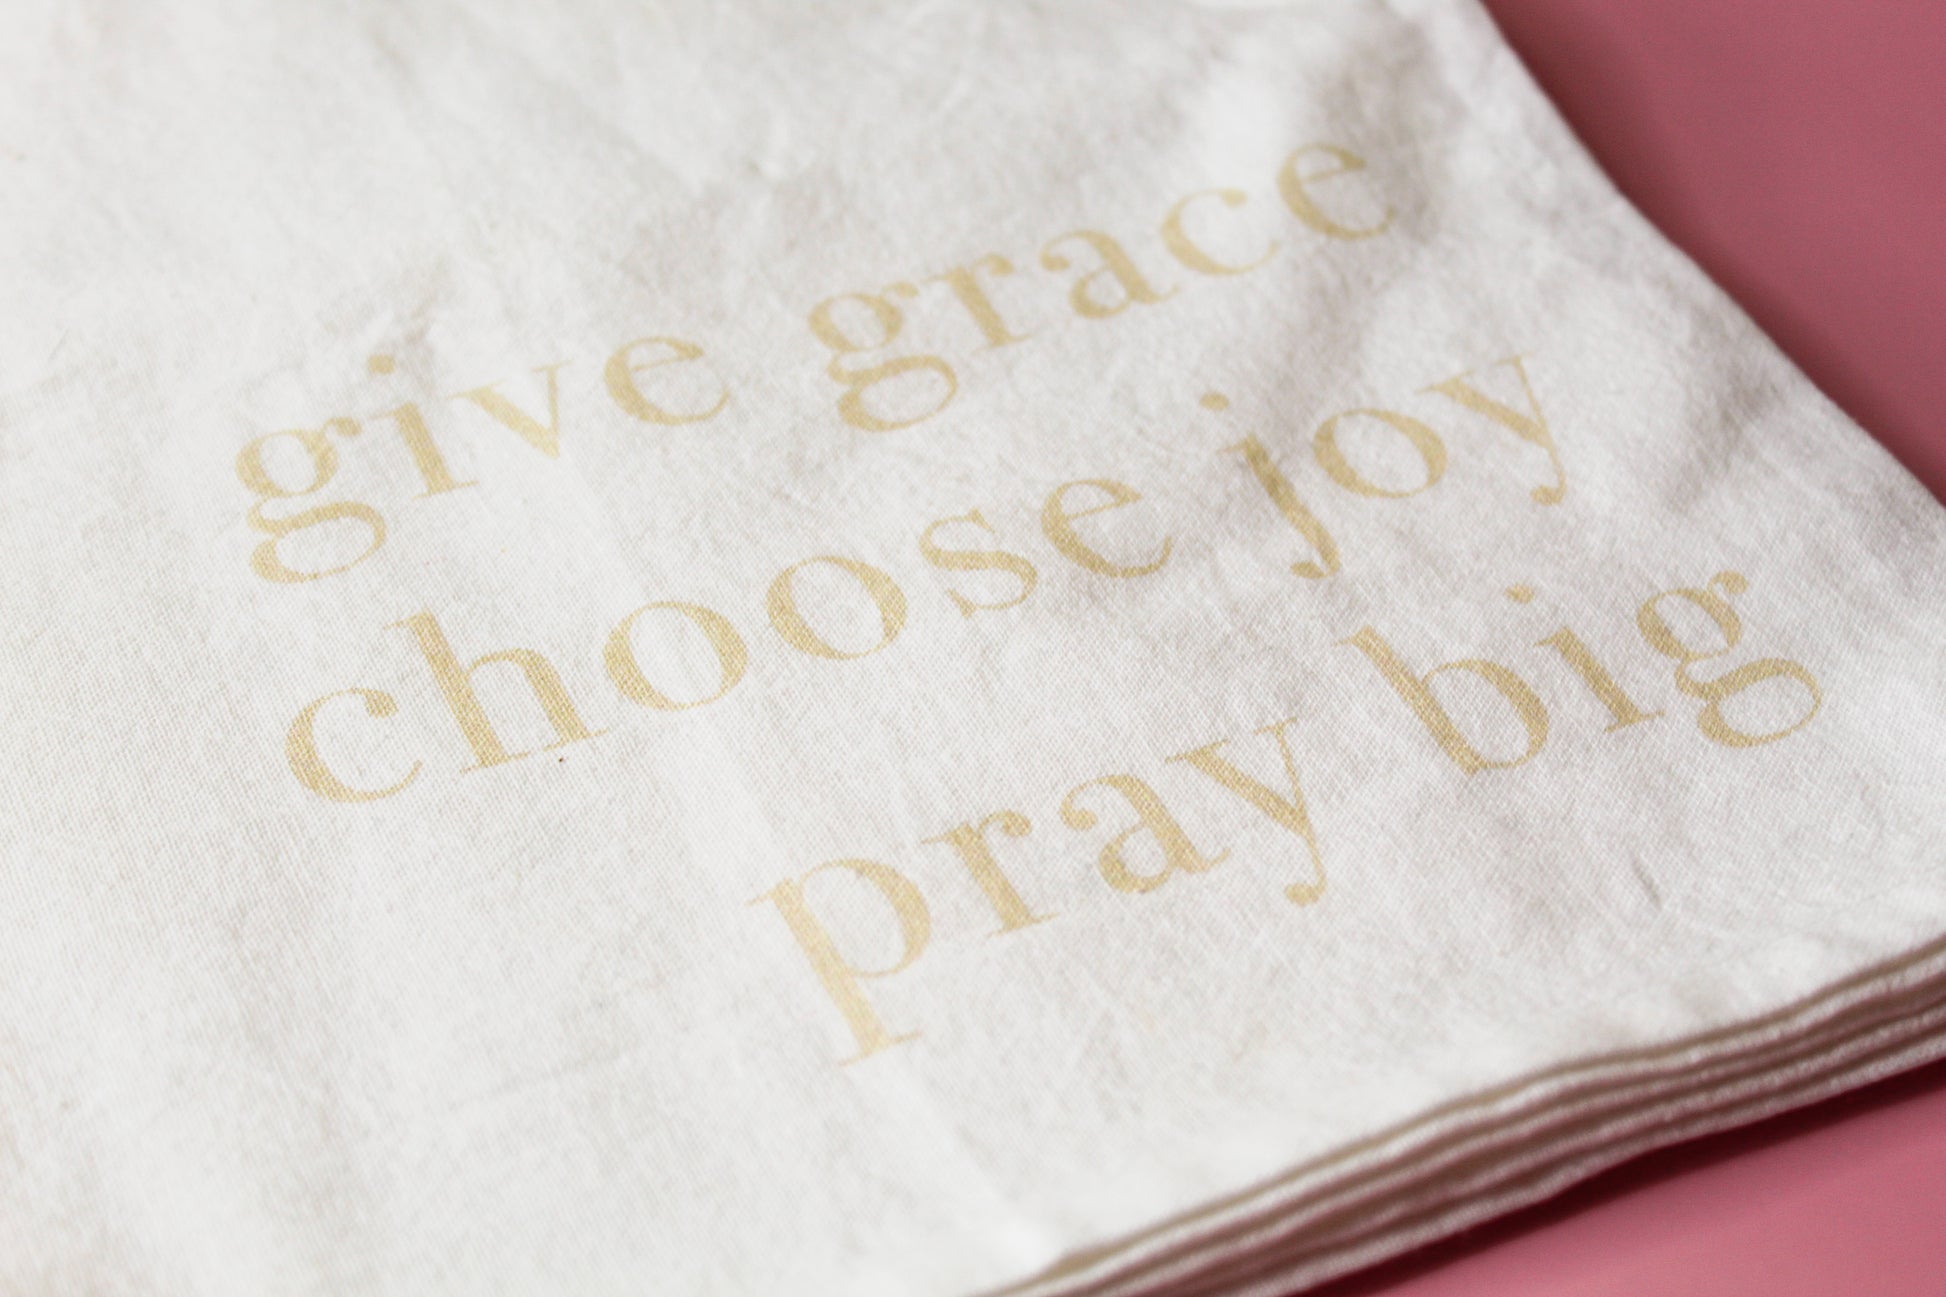 The Give Grace, Choose Joy, Pray Big is a hopeful tea towel and great present for any occasion. Our "Life Motto Collection" of three motivating phrases can bring joy and grace to your day. This tea towel is constructed with 100% cotton for long-lasting durability. Check out the other items from this inspirational collection - they can bring an even bigger impact! (This listing is for one tea towel only.)